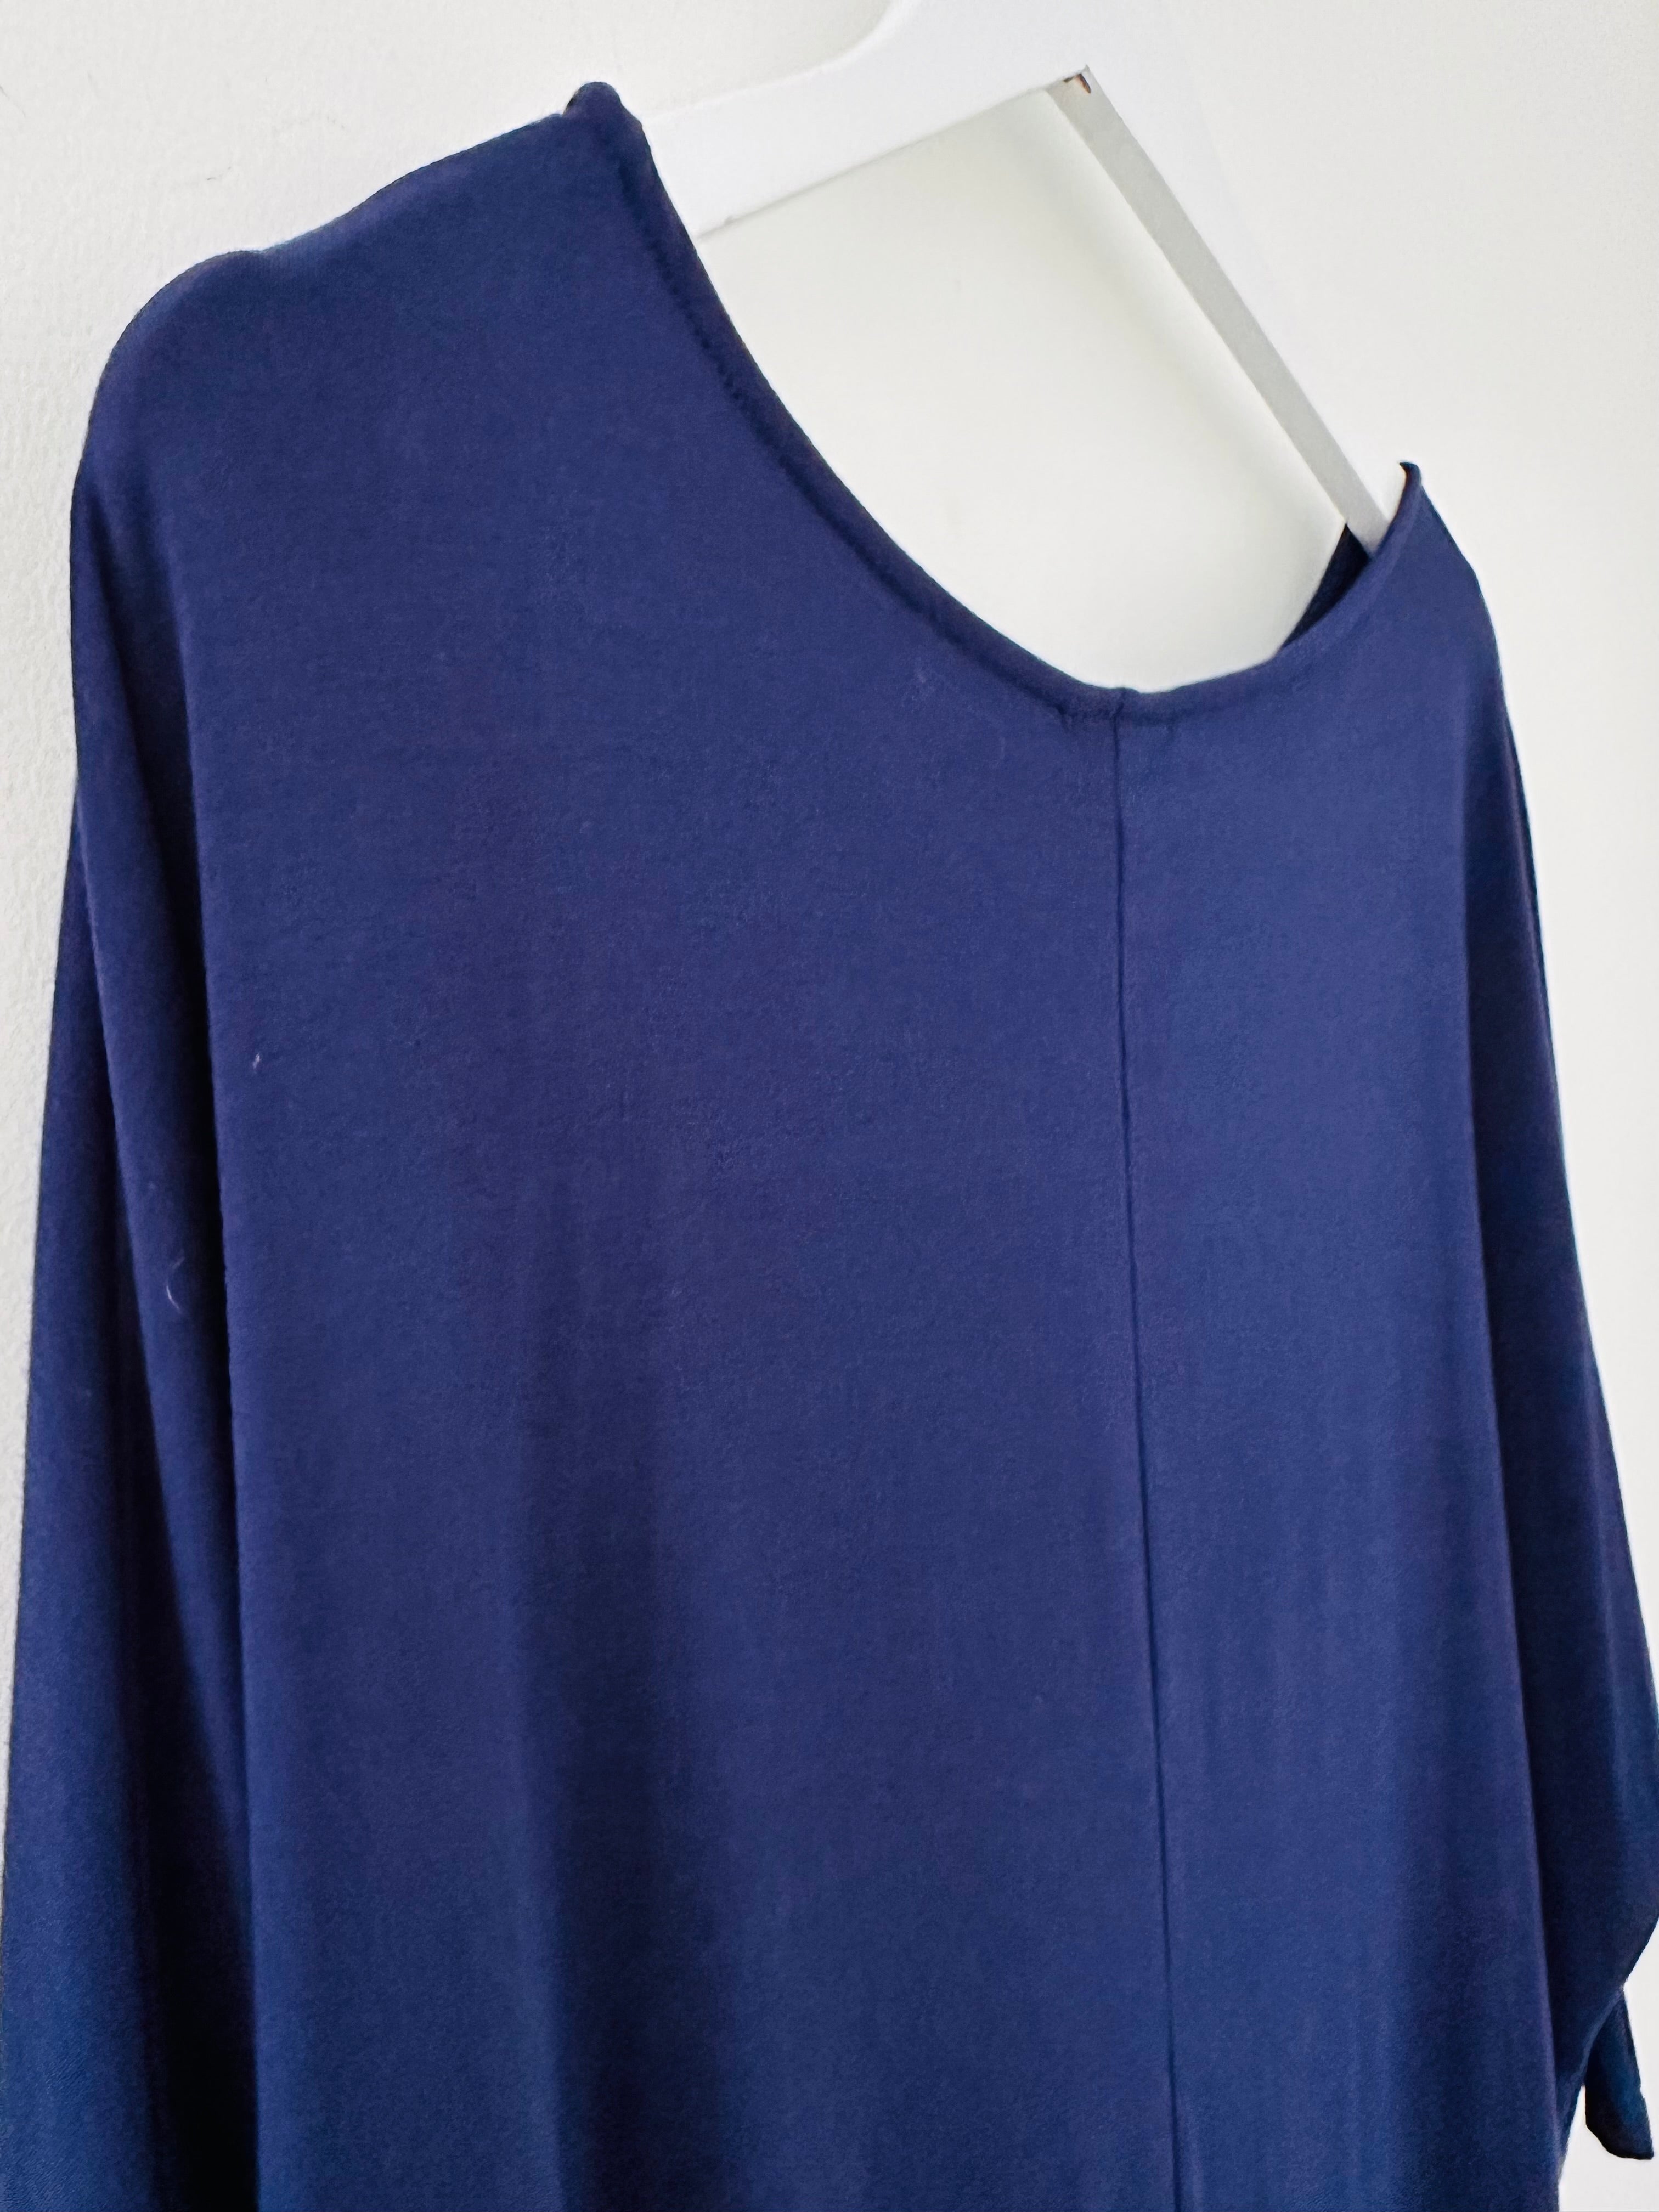 Bamboo Jersey Batwing Top in Navy